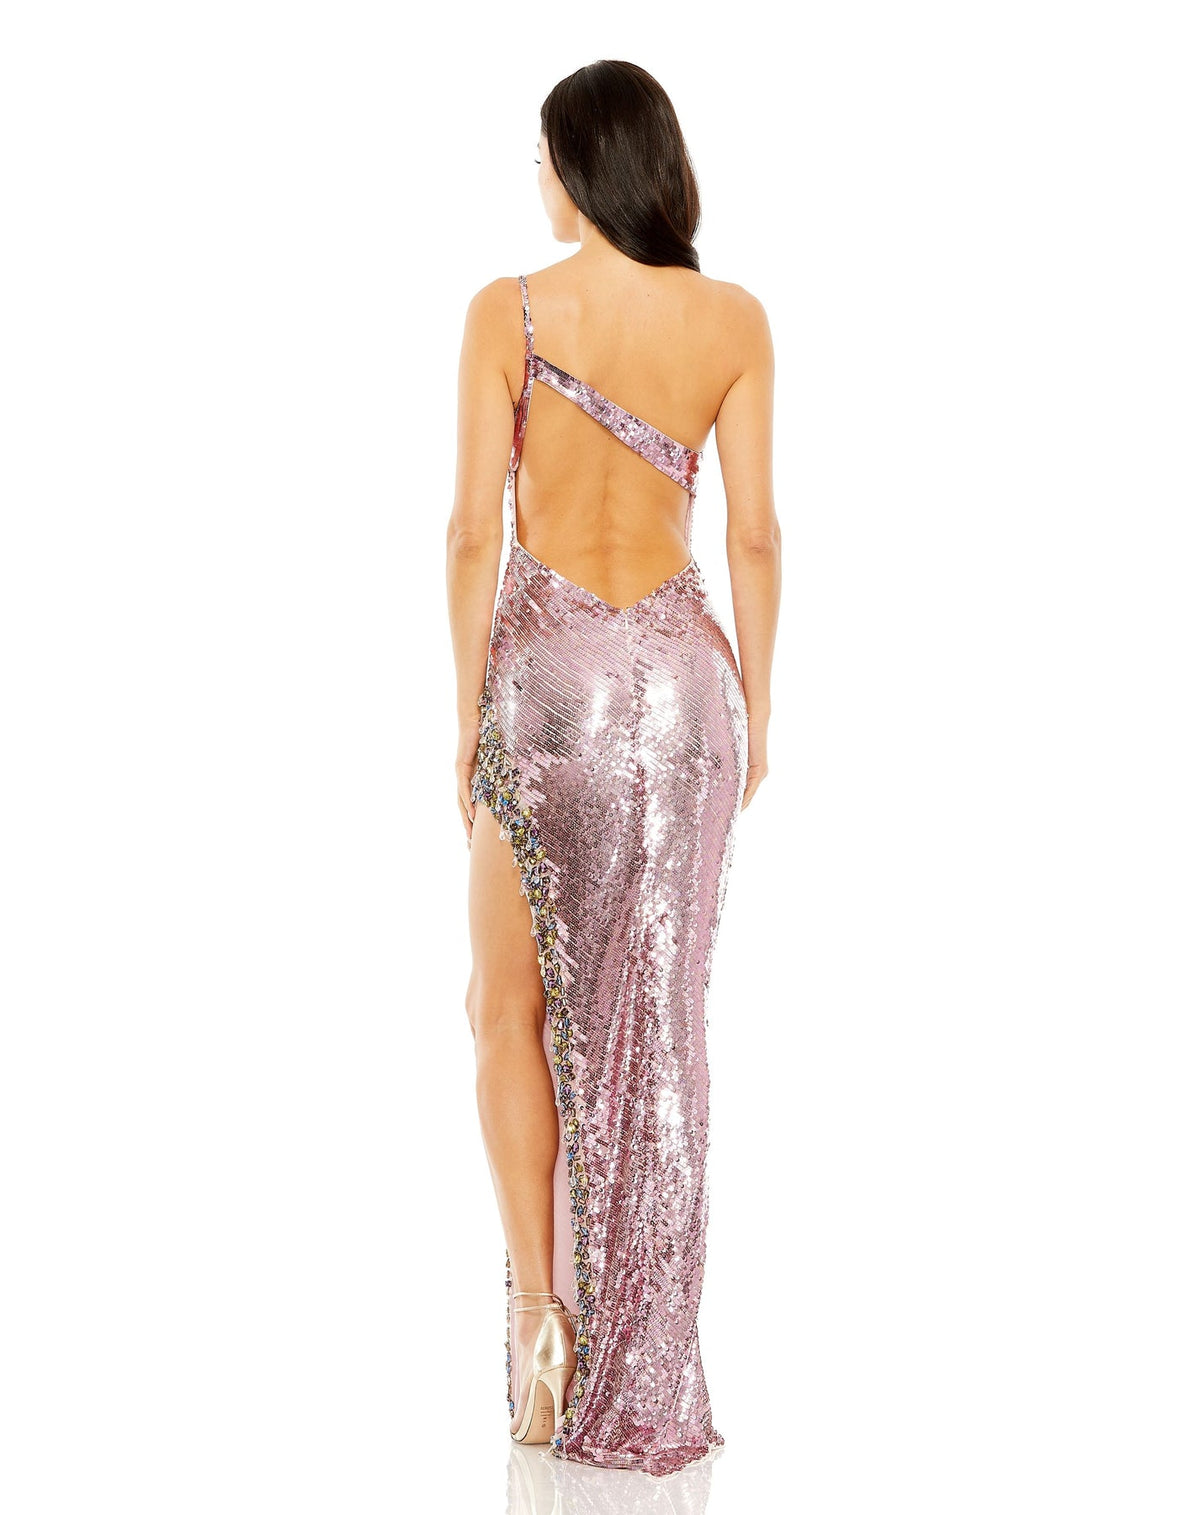 COWL NECK SEQUIN GOWN WITH RHINESTONE DETAIL Style #93955 backless